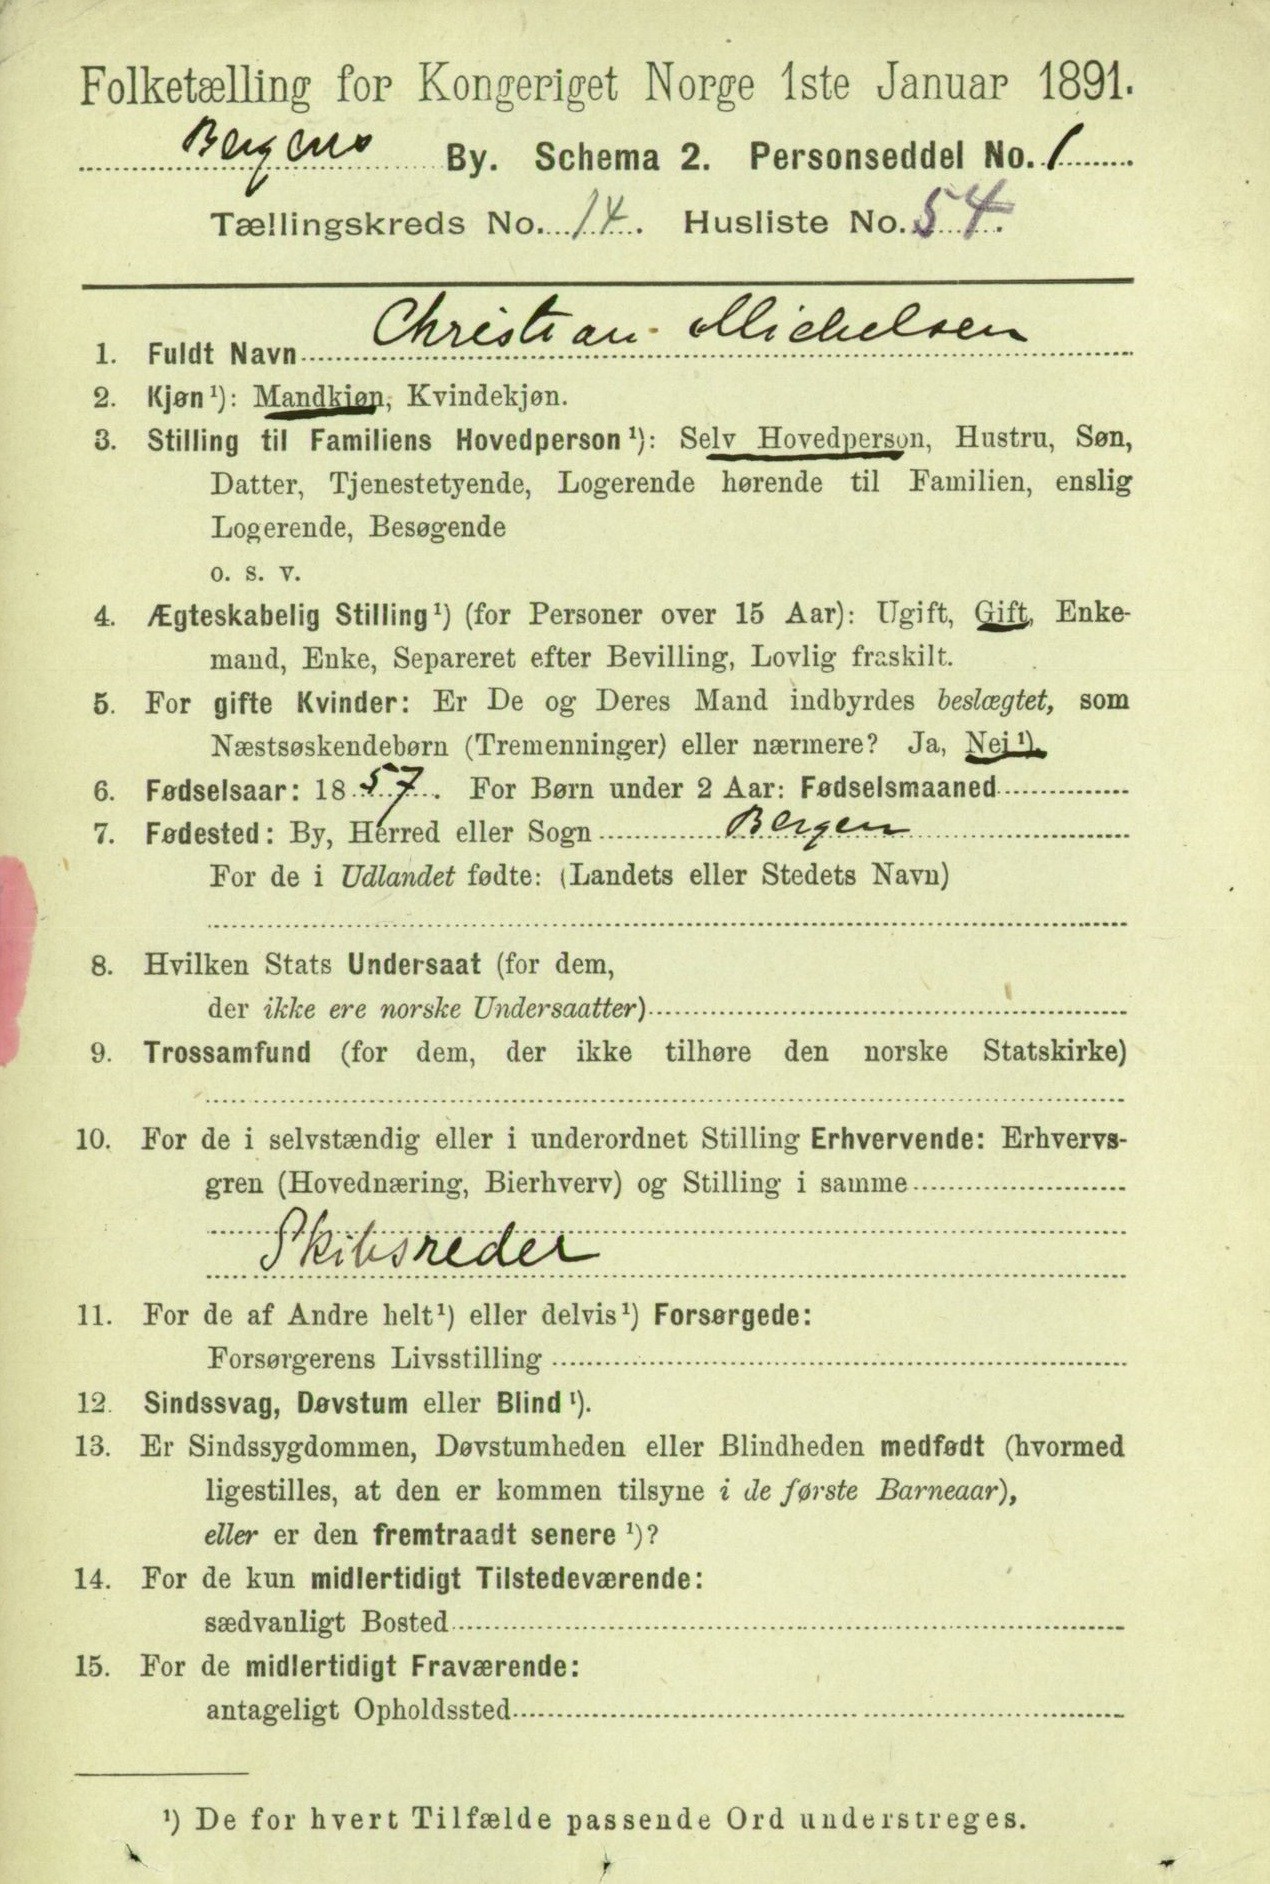 1891 Norway Census record in MyHeritage SuperSearch for Christian Michelsen